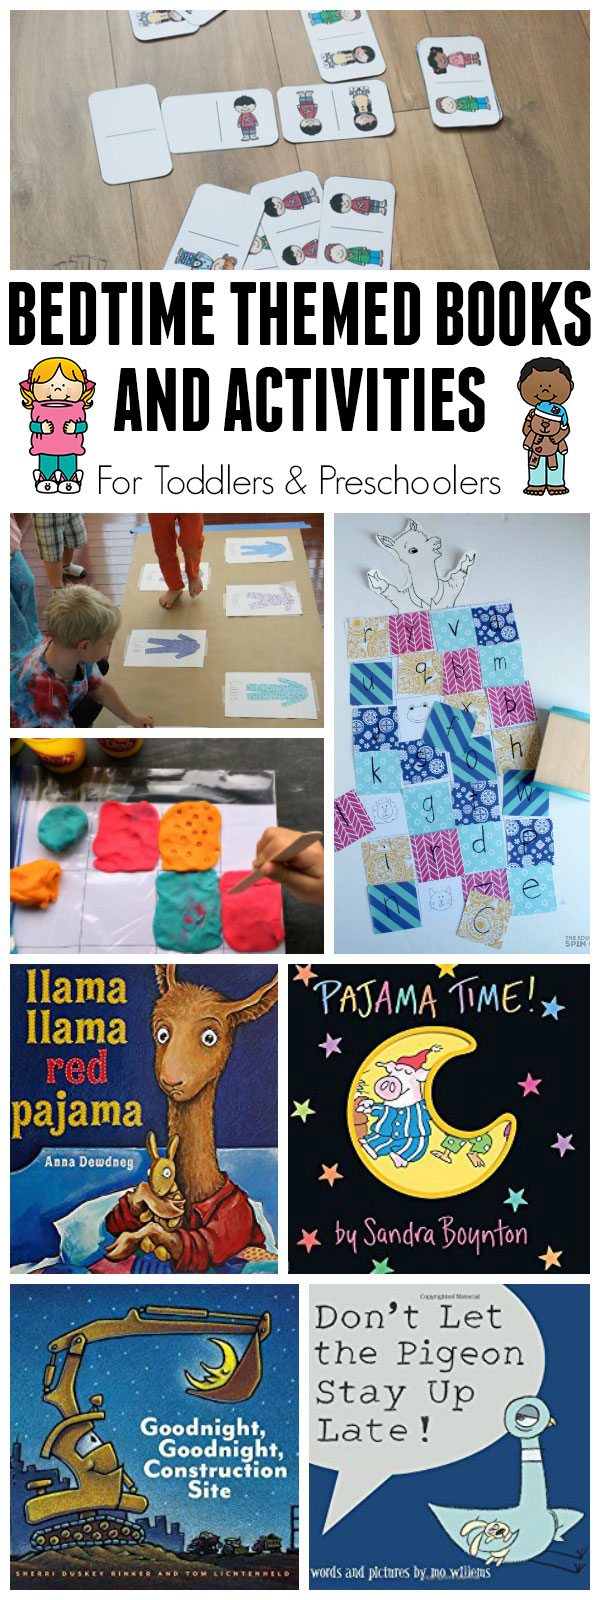 Fun activities based on the classic children's storybook Llama Llama Red Pajama by Anna Dewdney ideal for toddlers and preschoolers.